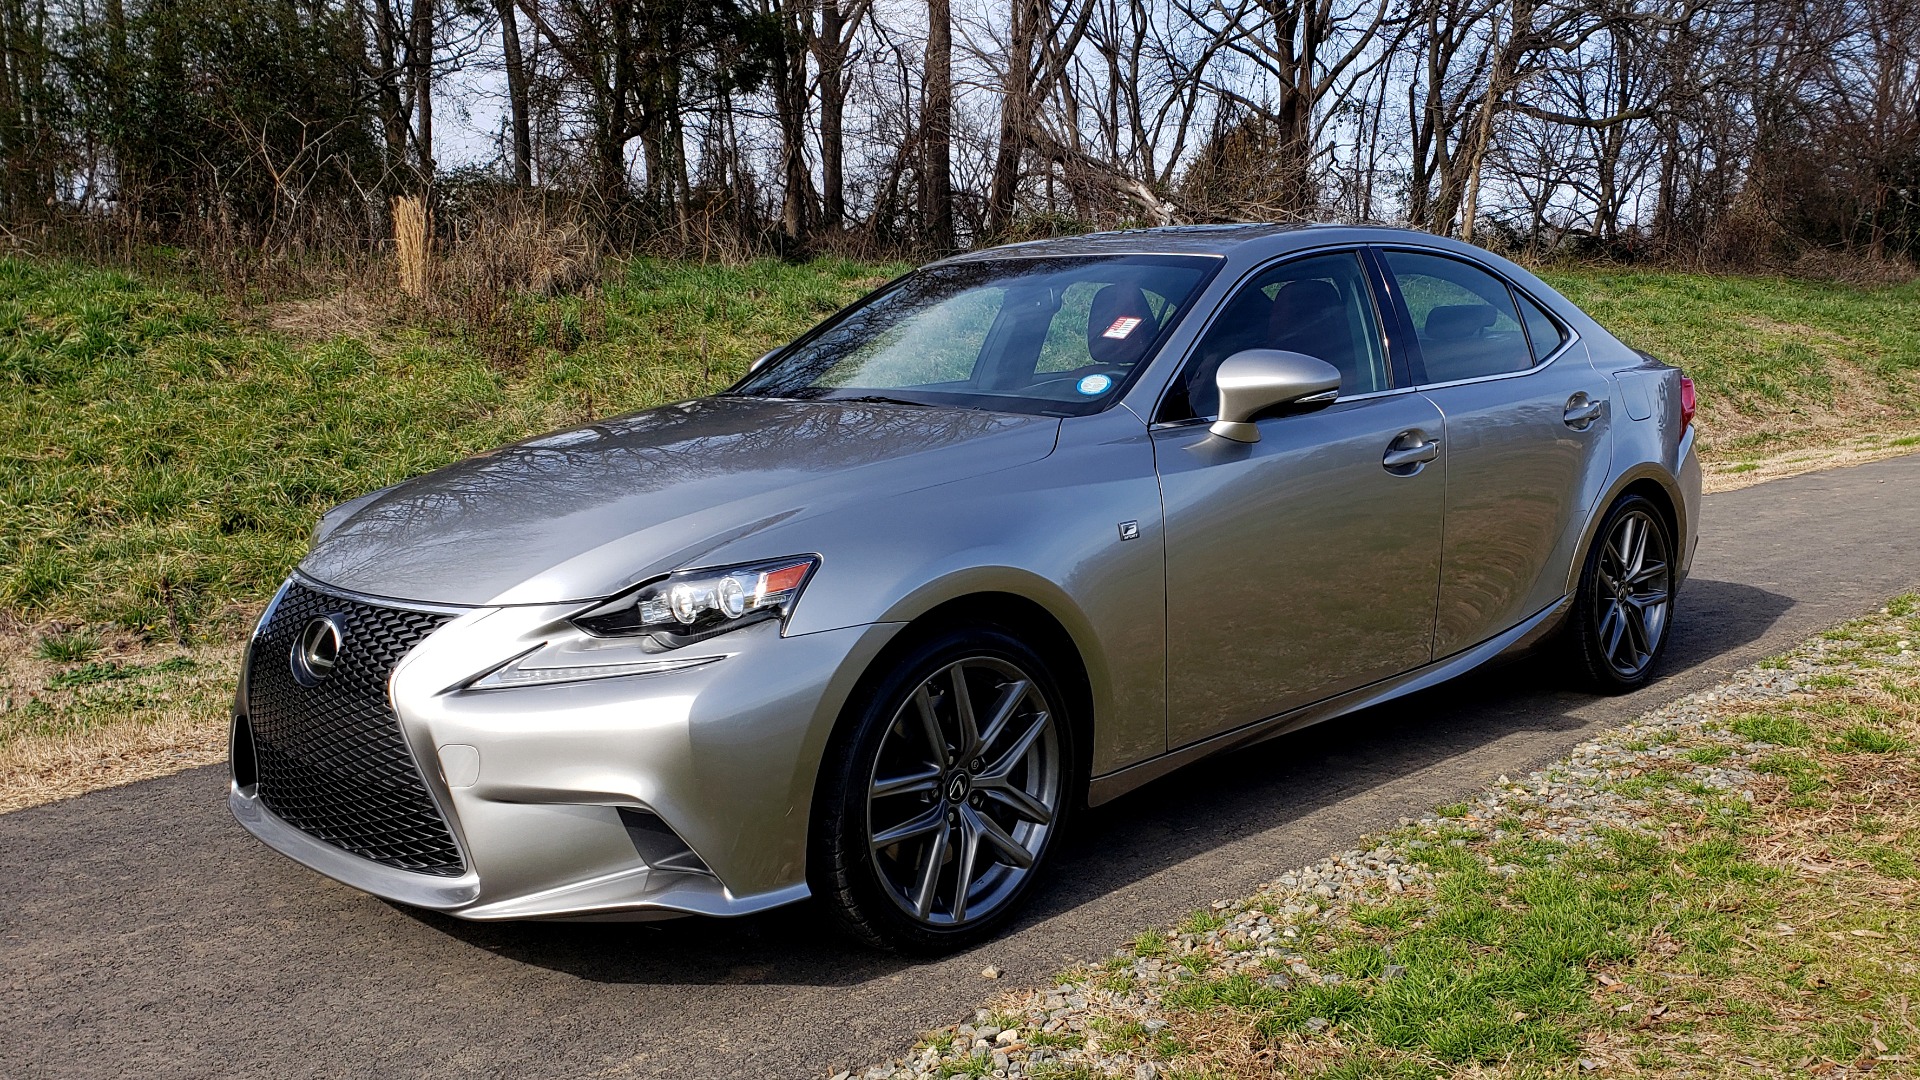 Used 2016 Lexus IS 350 F-SPORT / NAV / SUNROOF / BSM / REARVIEW for sale Sold at Formula Imports in Charlotte NC 28227 1